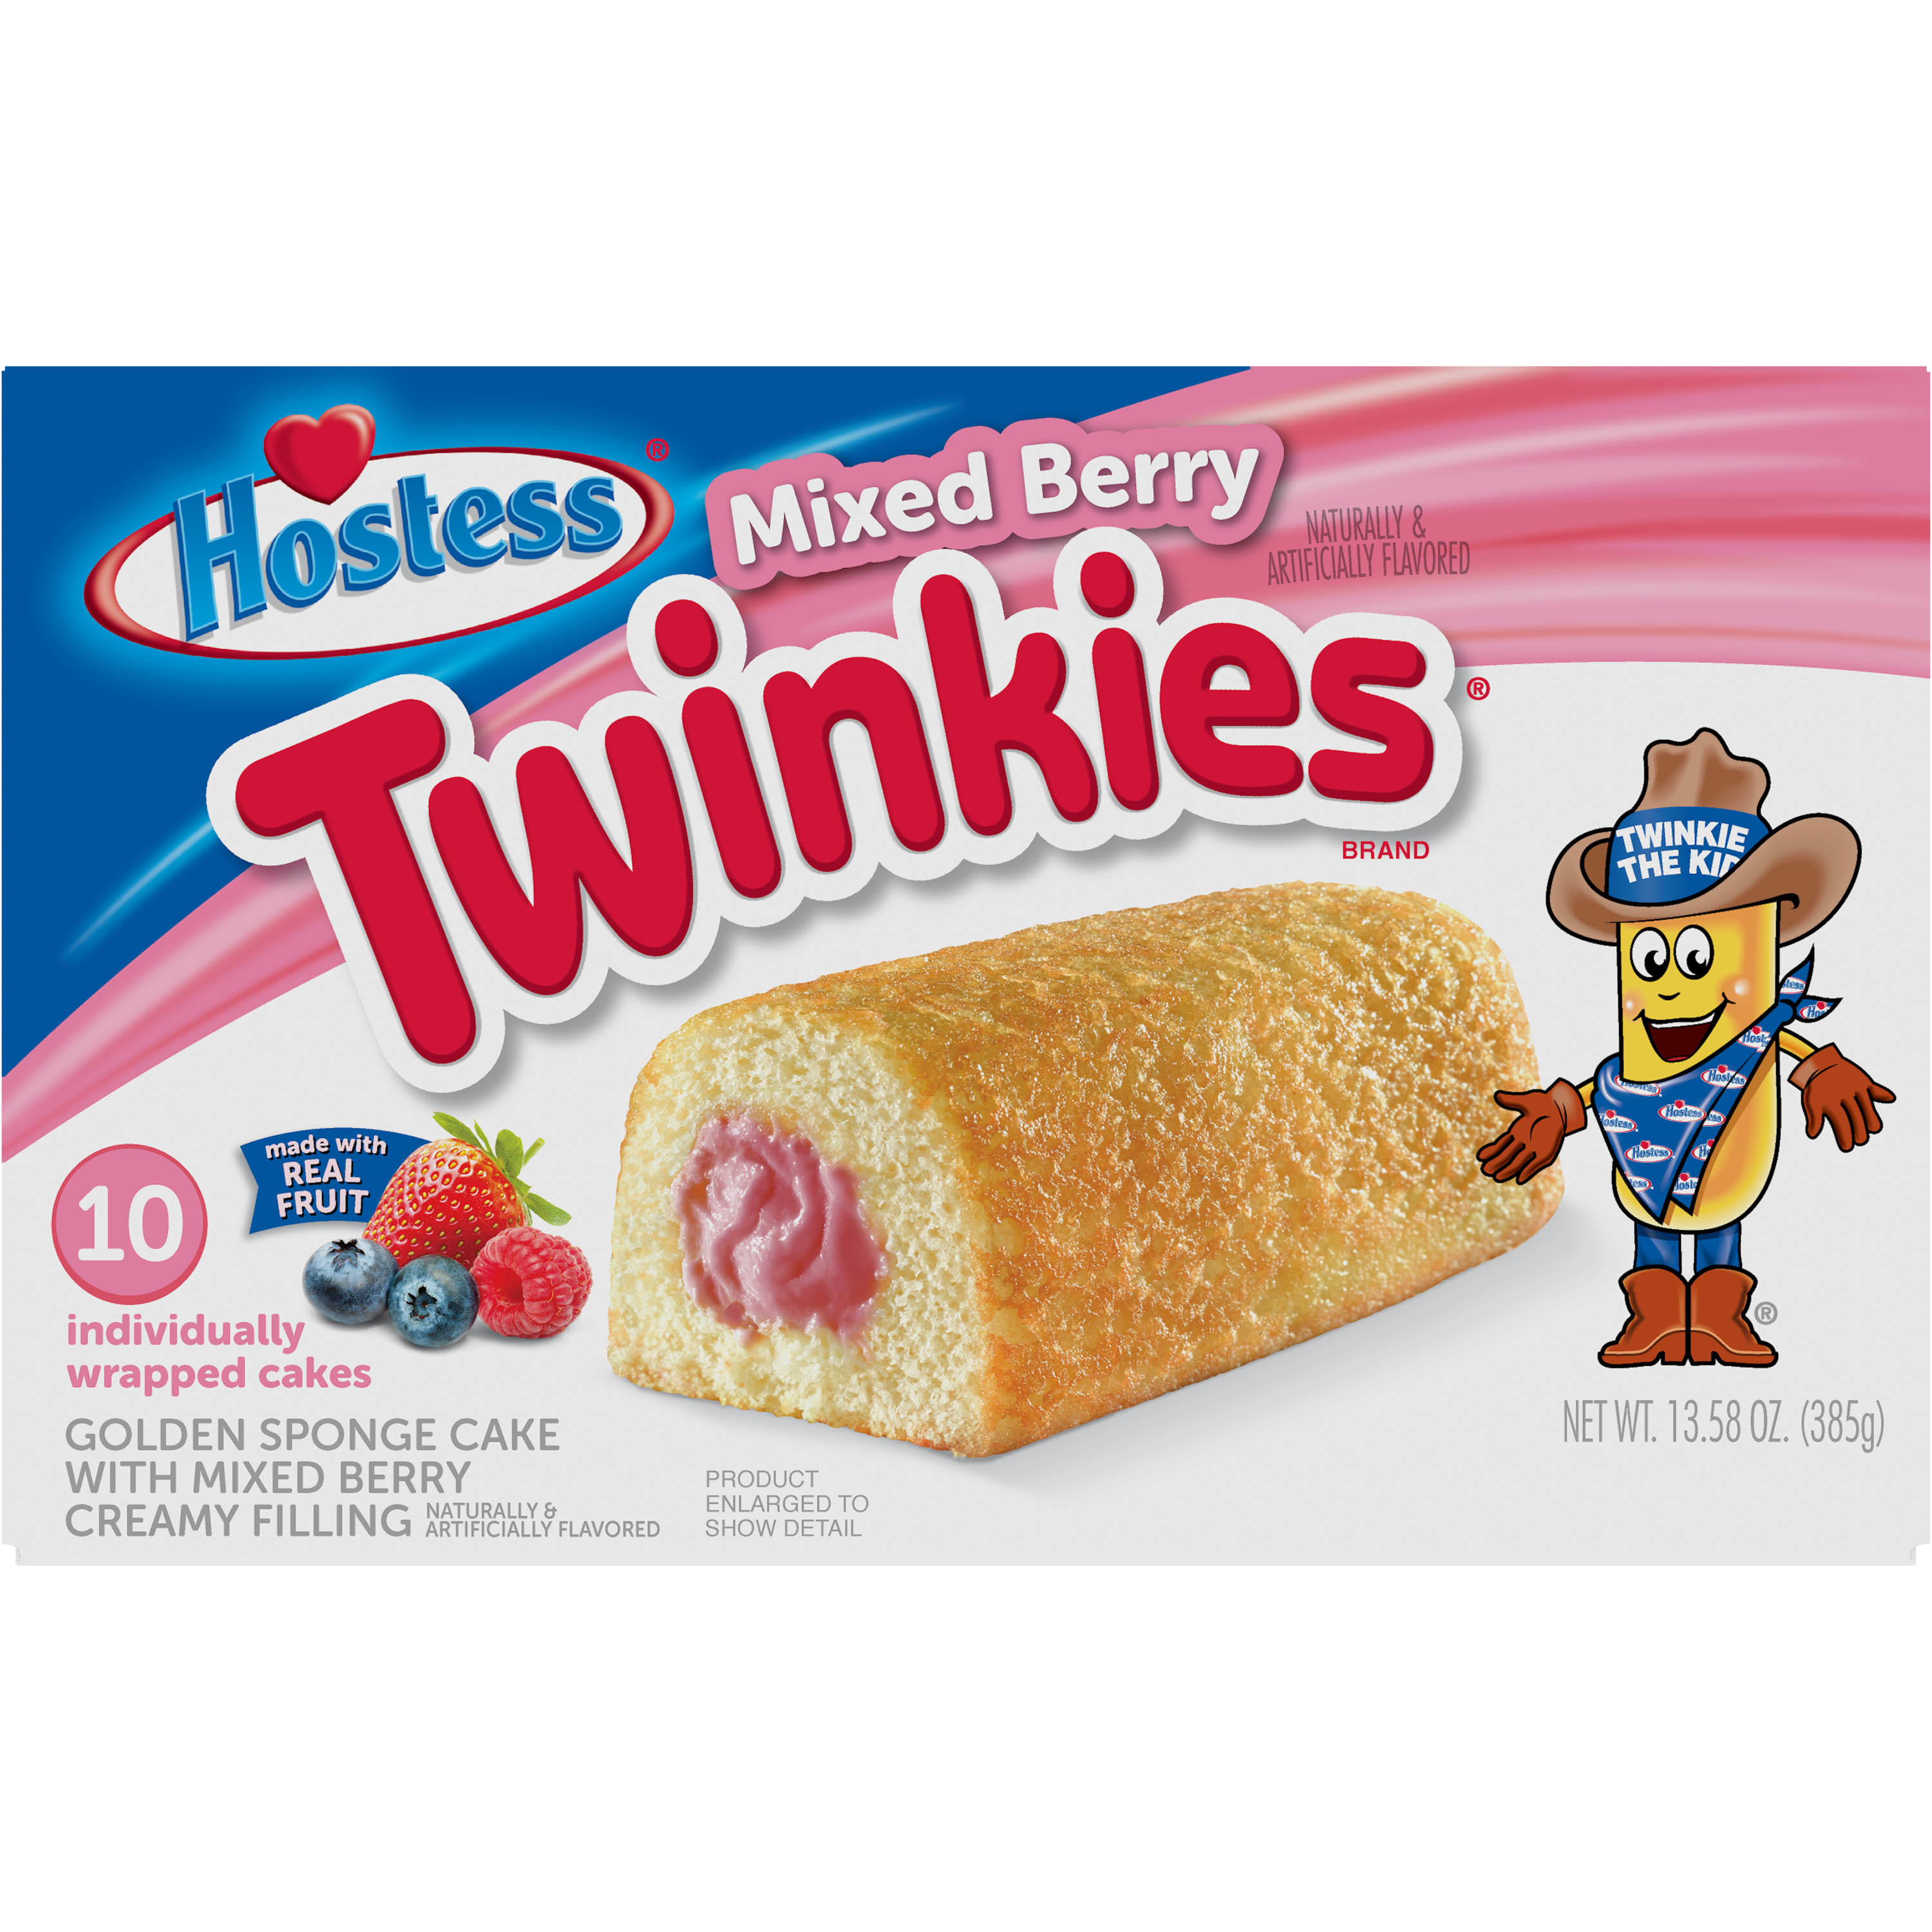 HOSTESS Mixed Berry TWINKIES Made With Real Fruit, 10 count, 13.58 oz